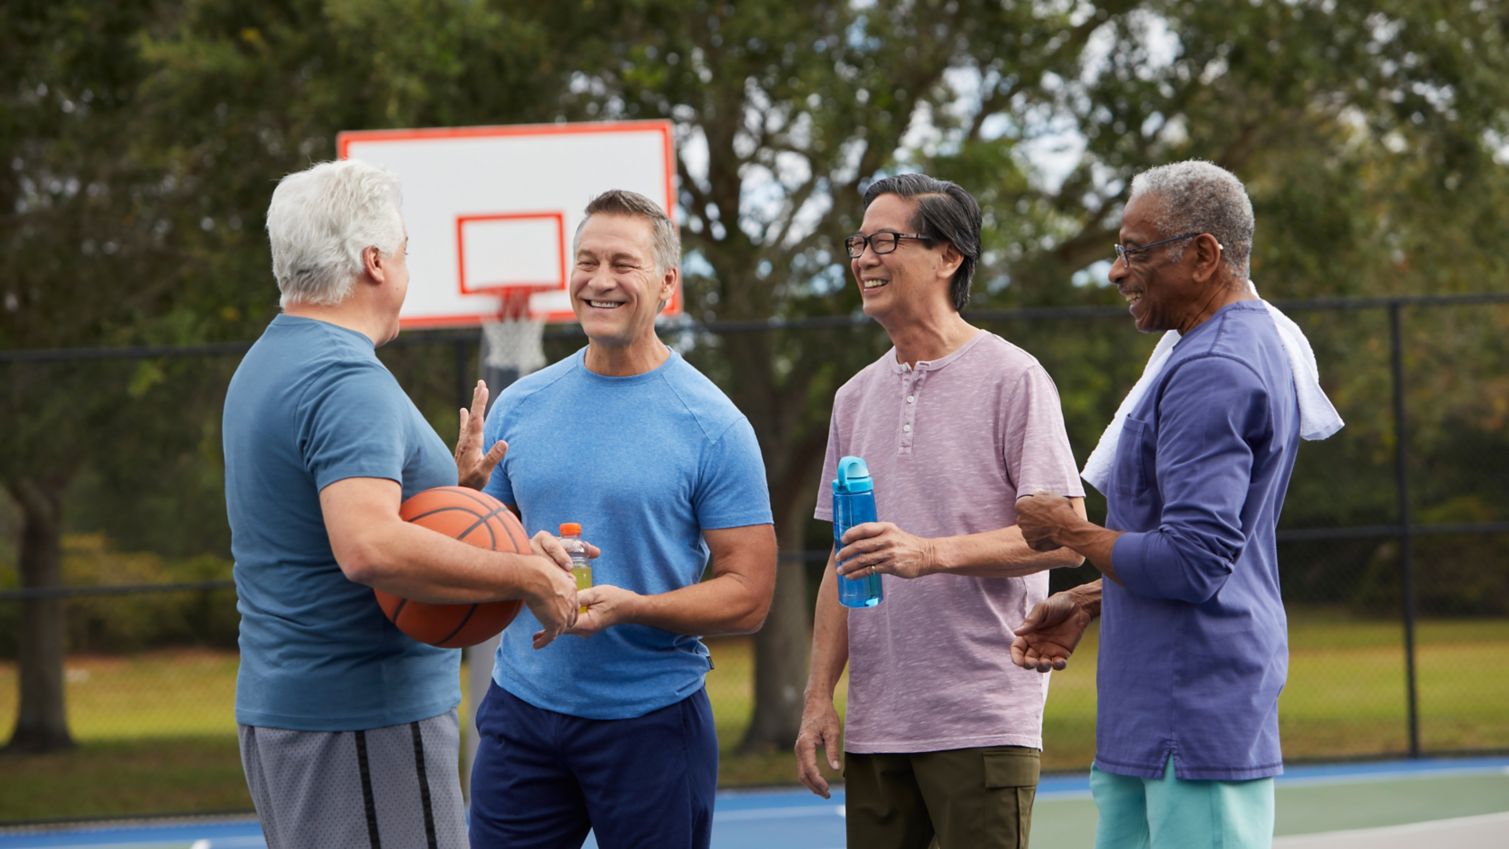 A group of friends chat on a basketball court.